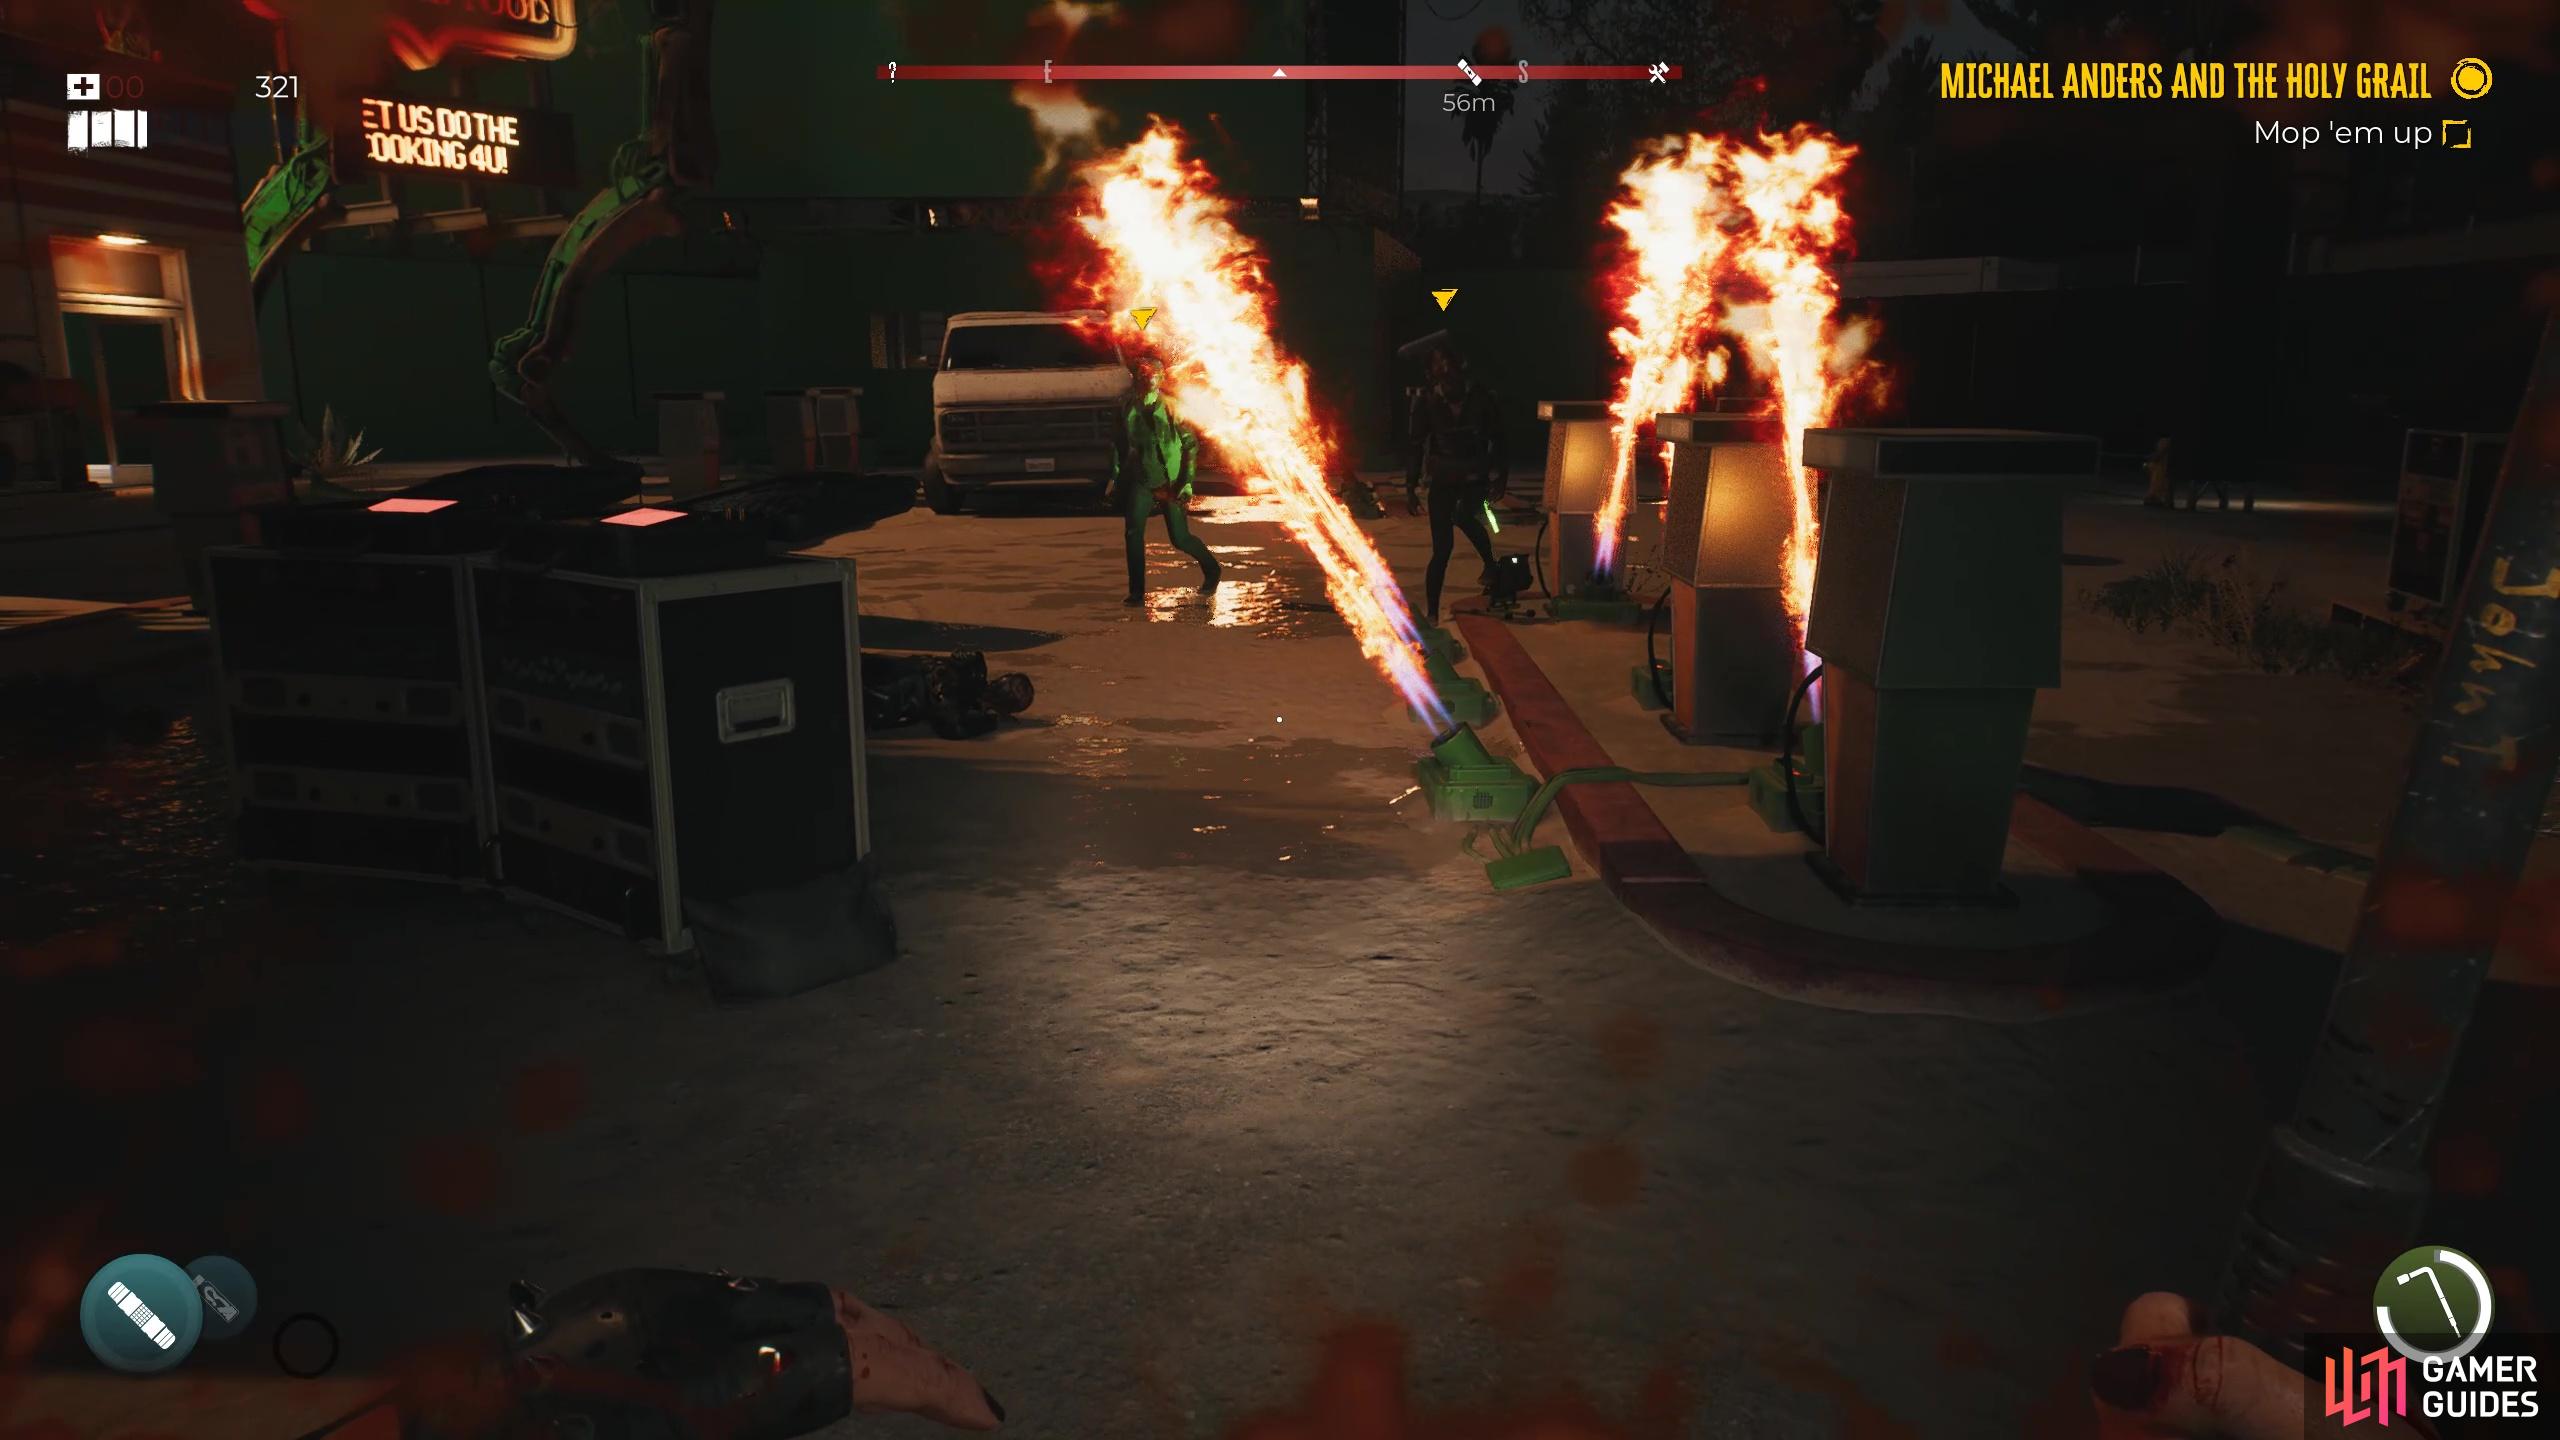 You can use the pyrotechnics to also kill the ads!